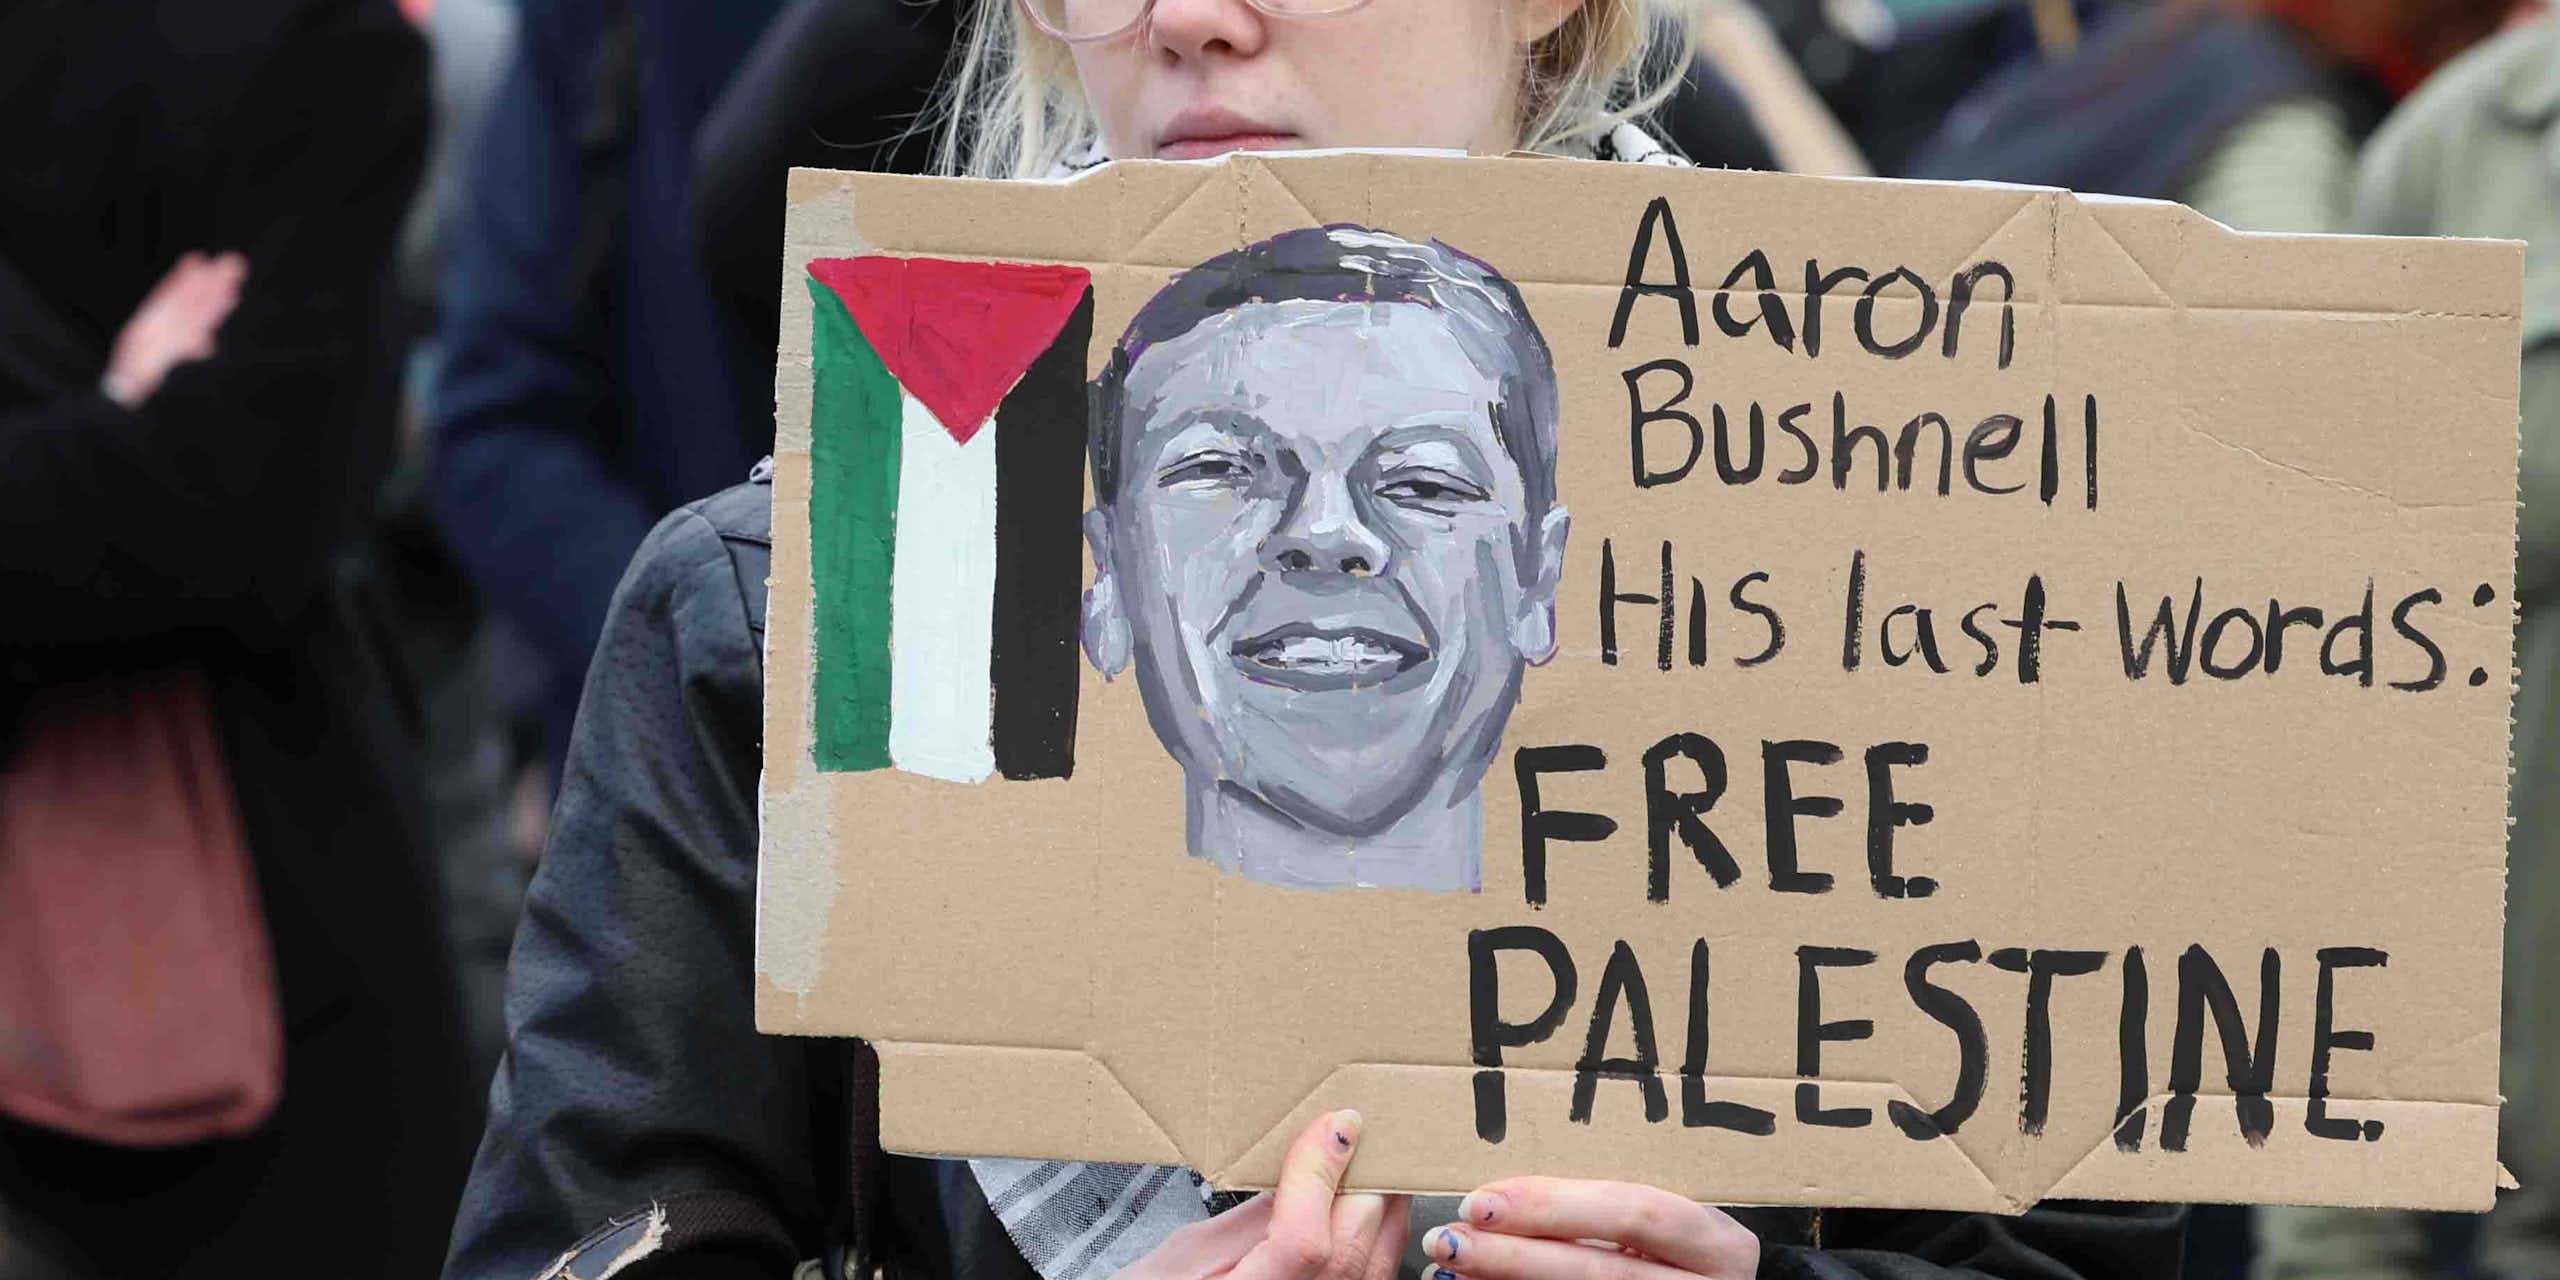 A protestor holding a placard reading "Aaron Bushnell, His last words: Free Palestine"